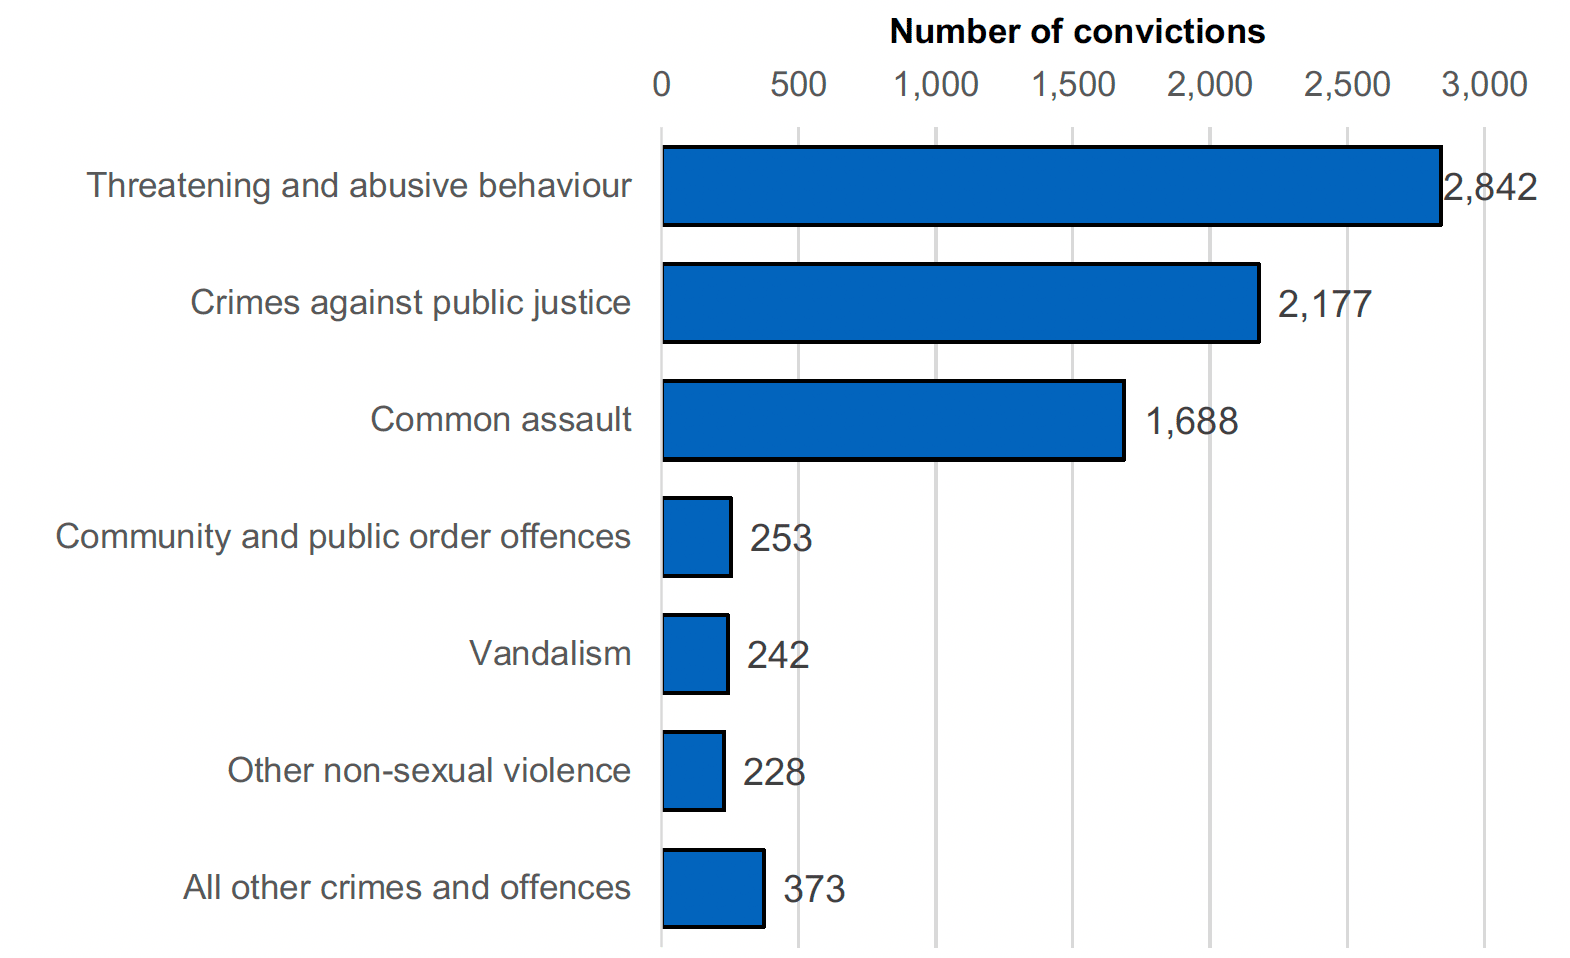 Bar chart showing the number of convictions with a domestic abuse statutory aggravator by crime type, with the highest being for Threatening and abusive behaviour (2,842) and Crimes against public justice (2,177).